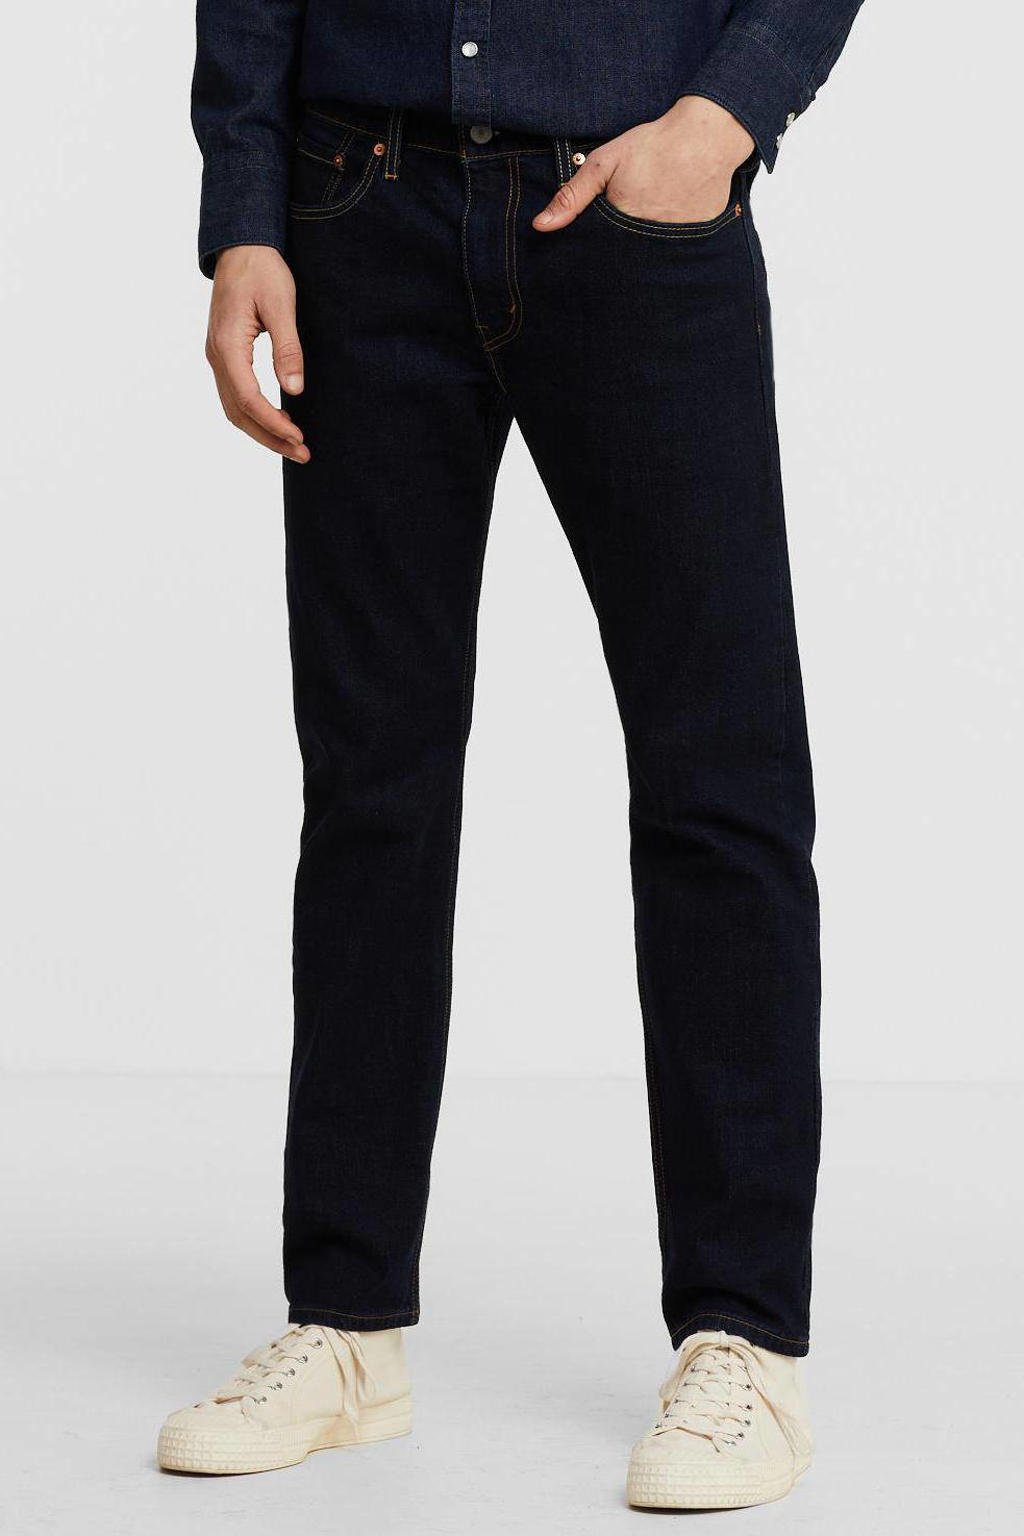 Levi's 502 tapered fit jeans ama rinsey